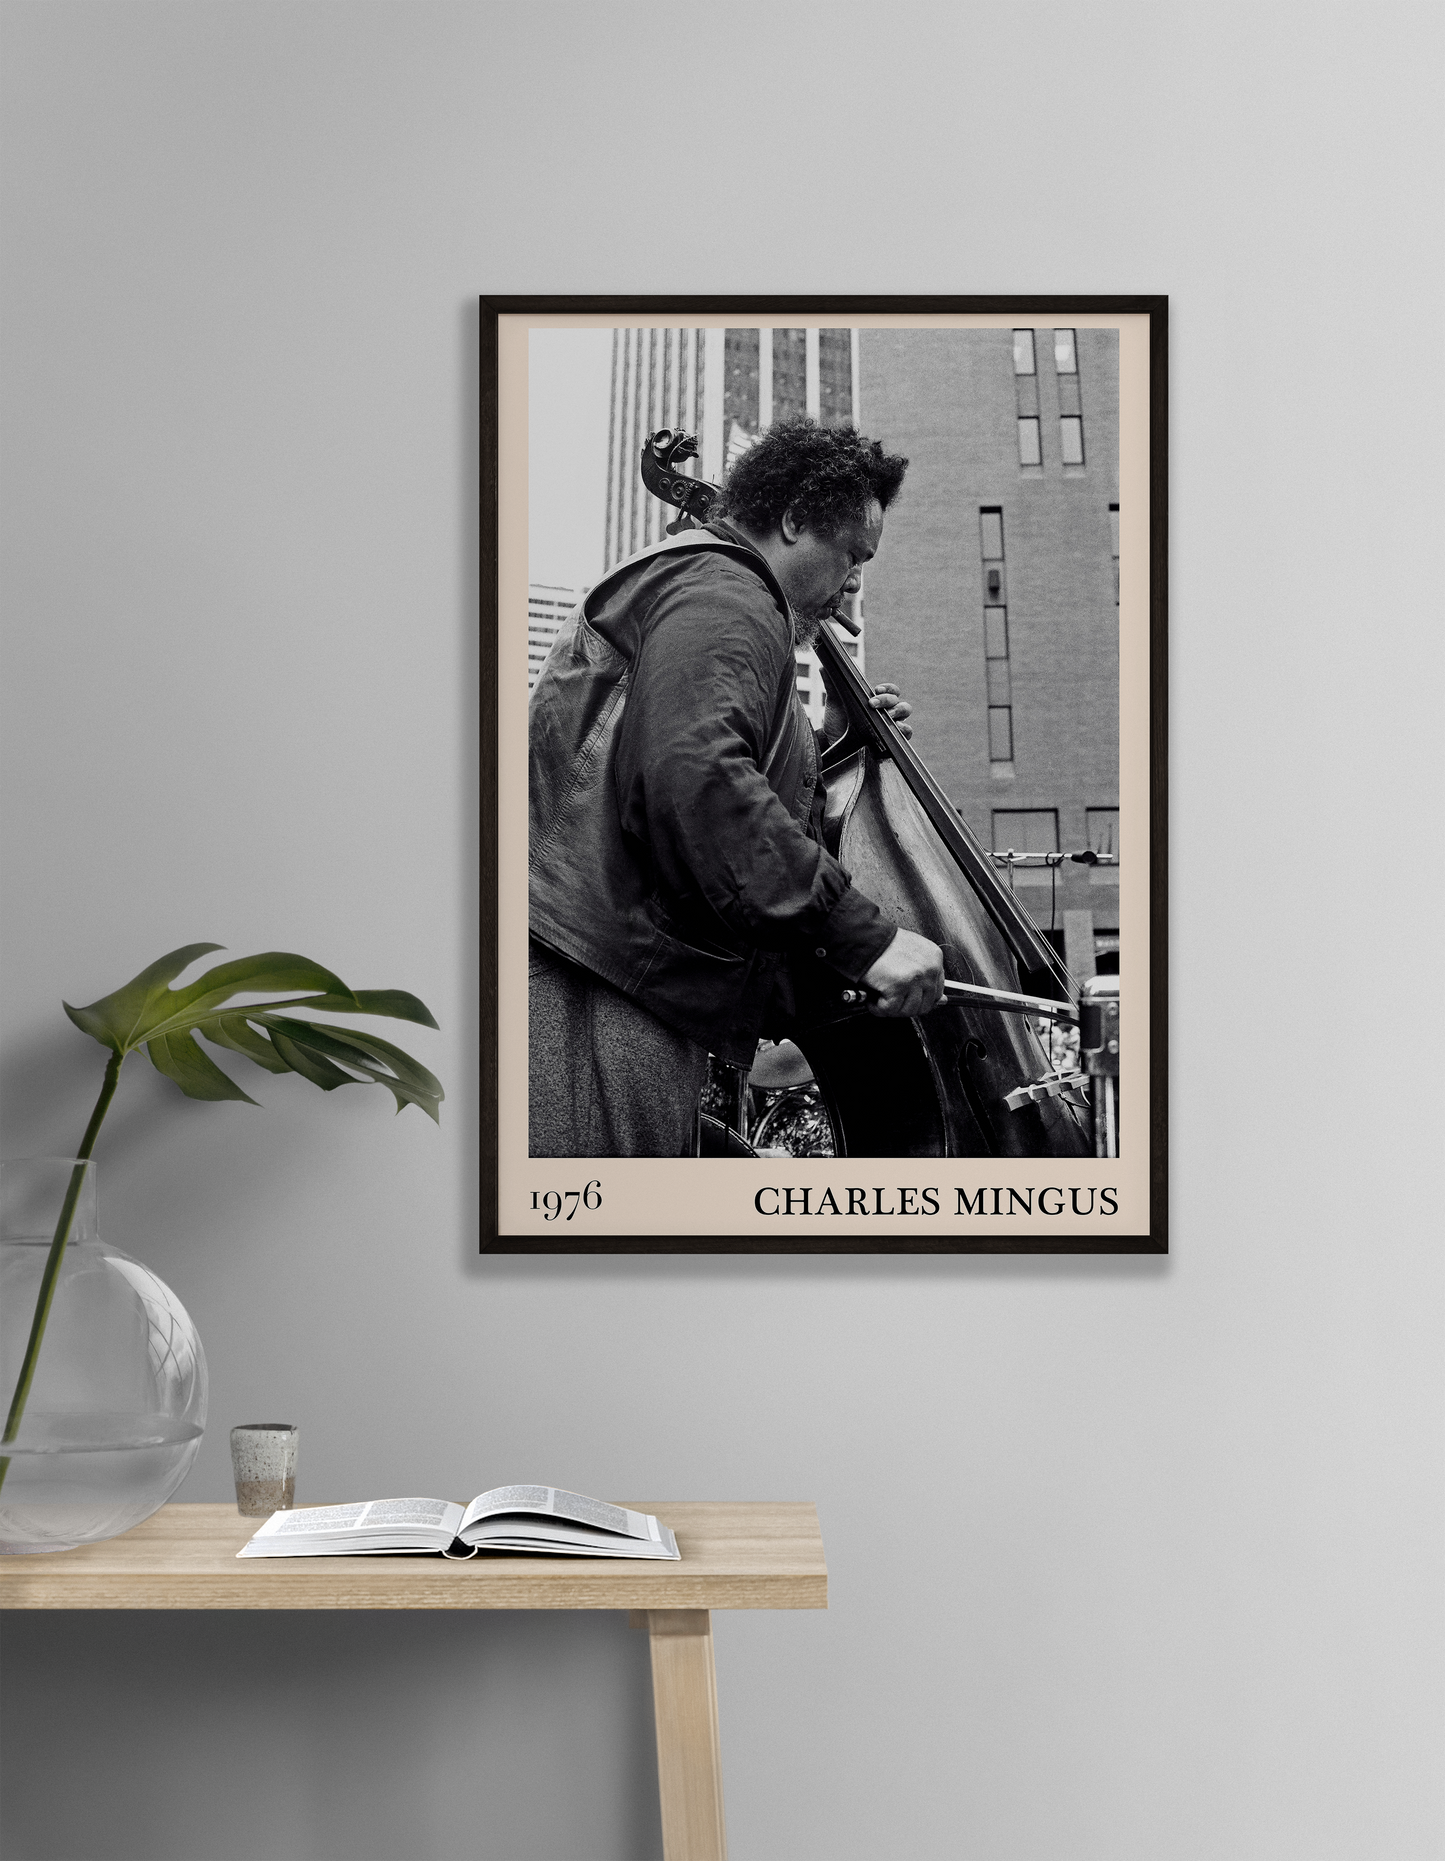 1976 photograph of Charles Mingus taken by Thomas Marcello. Picture crafted into a cool black framed music print, with an off-white border. Poster is hanging on a off-white living room wall.